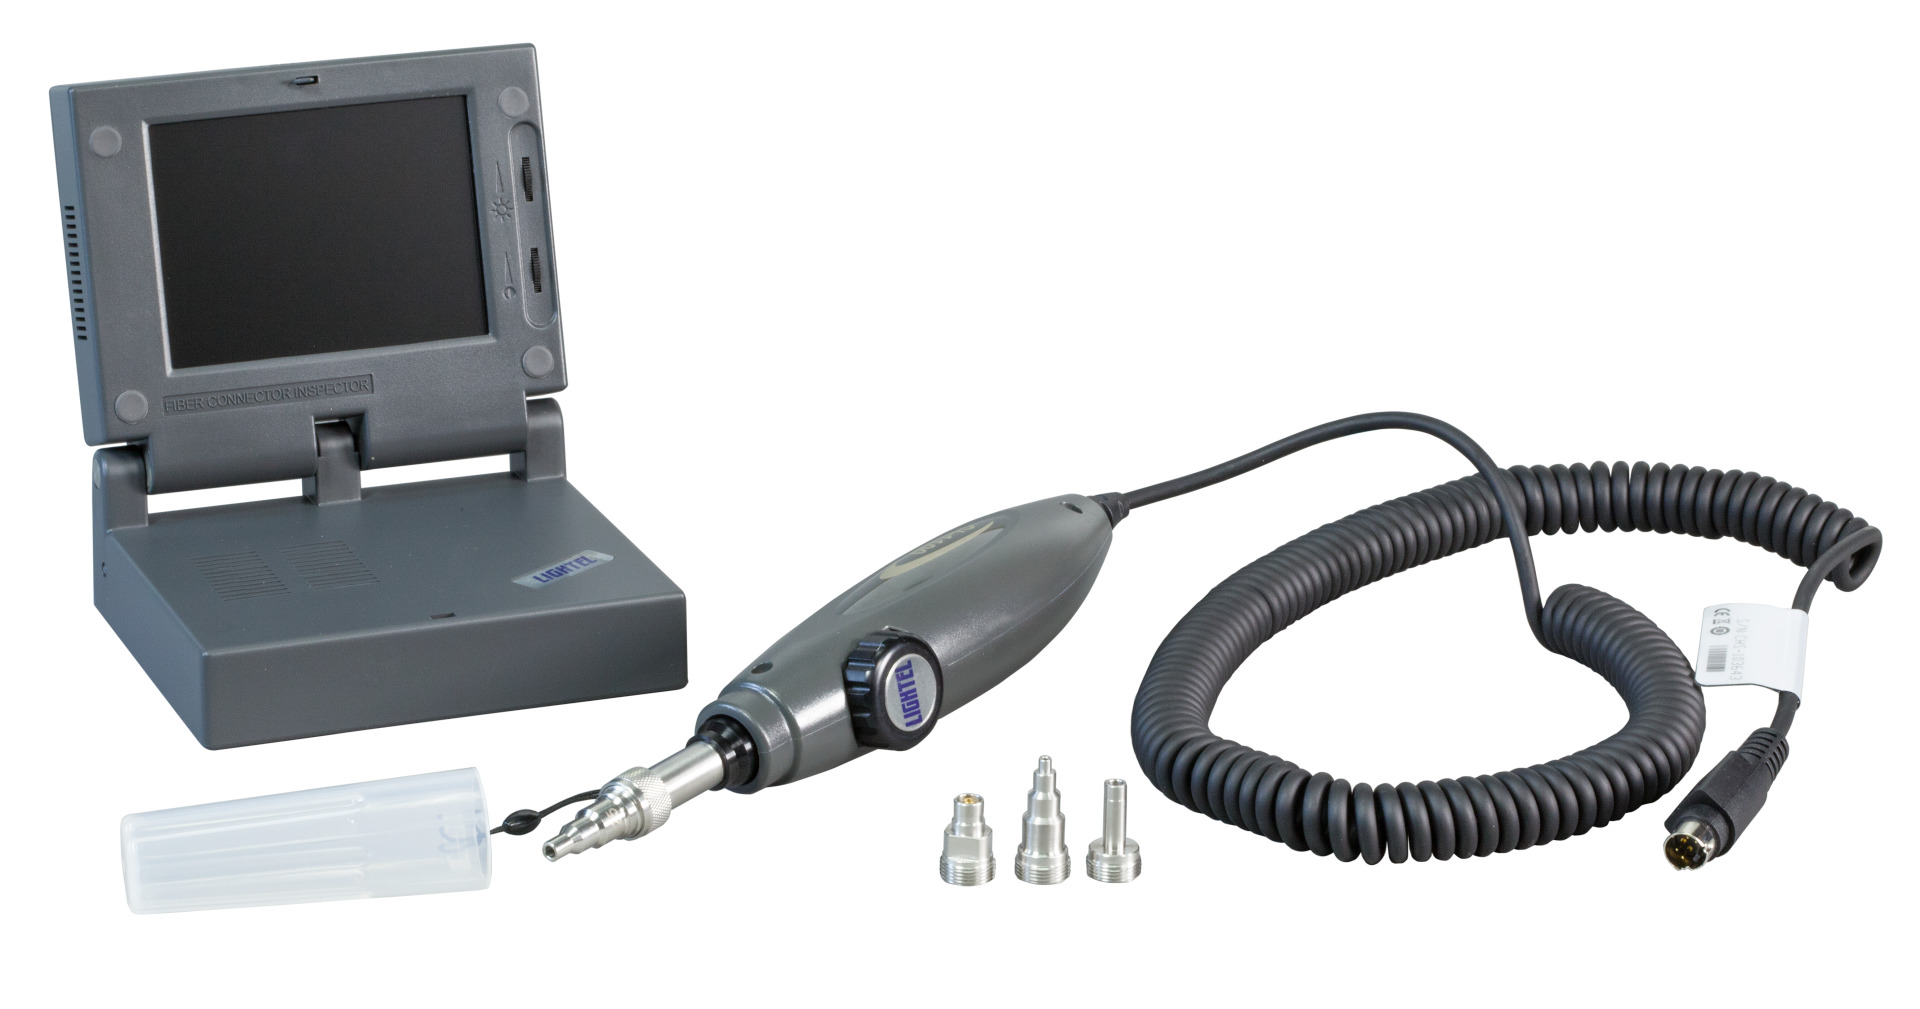 Fiber Optic Inspection Microscope for 2,5mm and 1,25mm ferrules